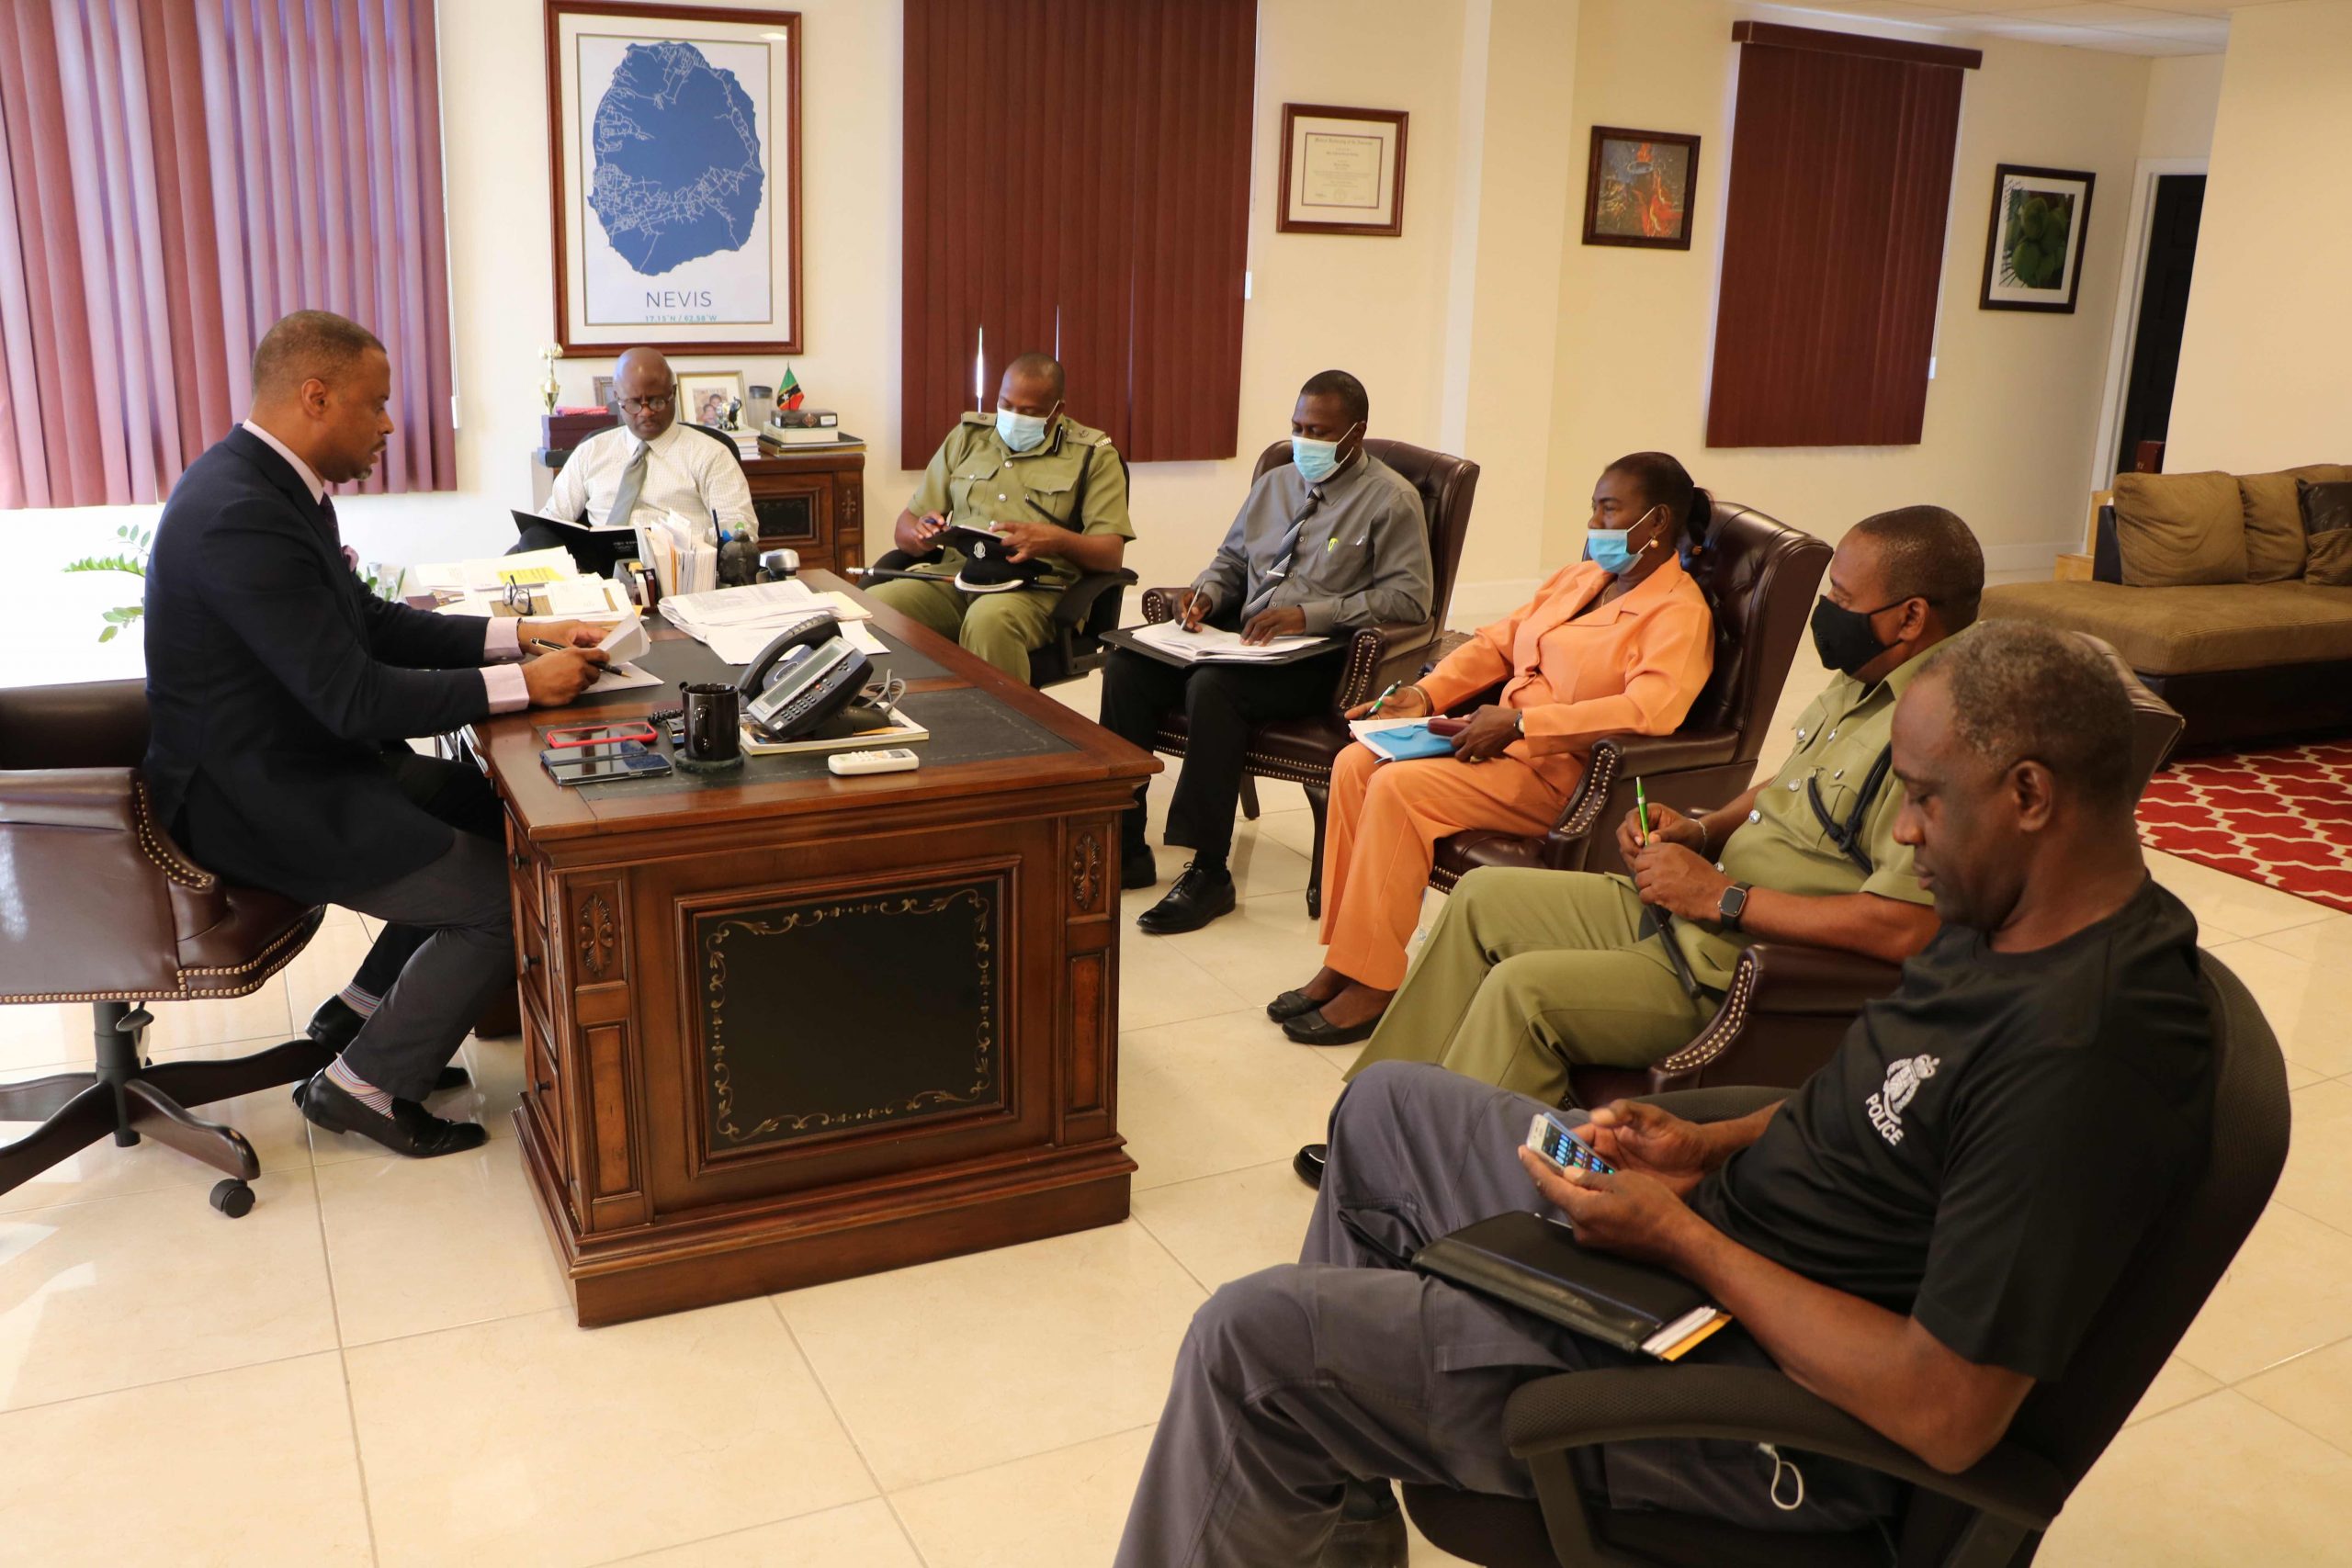 (L-r) Hon. Mark Brantley, Premier of Nevis (at desk); Mr. Wakely Daniel, Permanent Secretary in the Premier’s Ministry; Superintendent Lyndon David, Royal St. Christopher and Nevis Police Force Divisional Commander for District 'C'; Inspector Alonzo Carty; Inspector Urita Collins-Percival; Inspector Reynold Myers; and Inspector James Stephens at a security briefing at the Office of the Premier at Pinney’s Estate on February 02, 2020